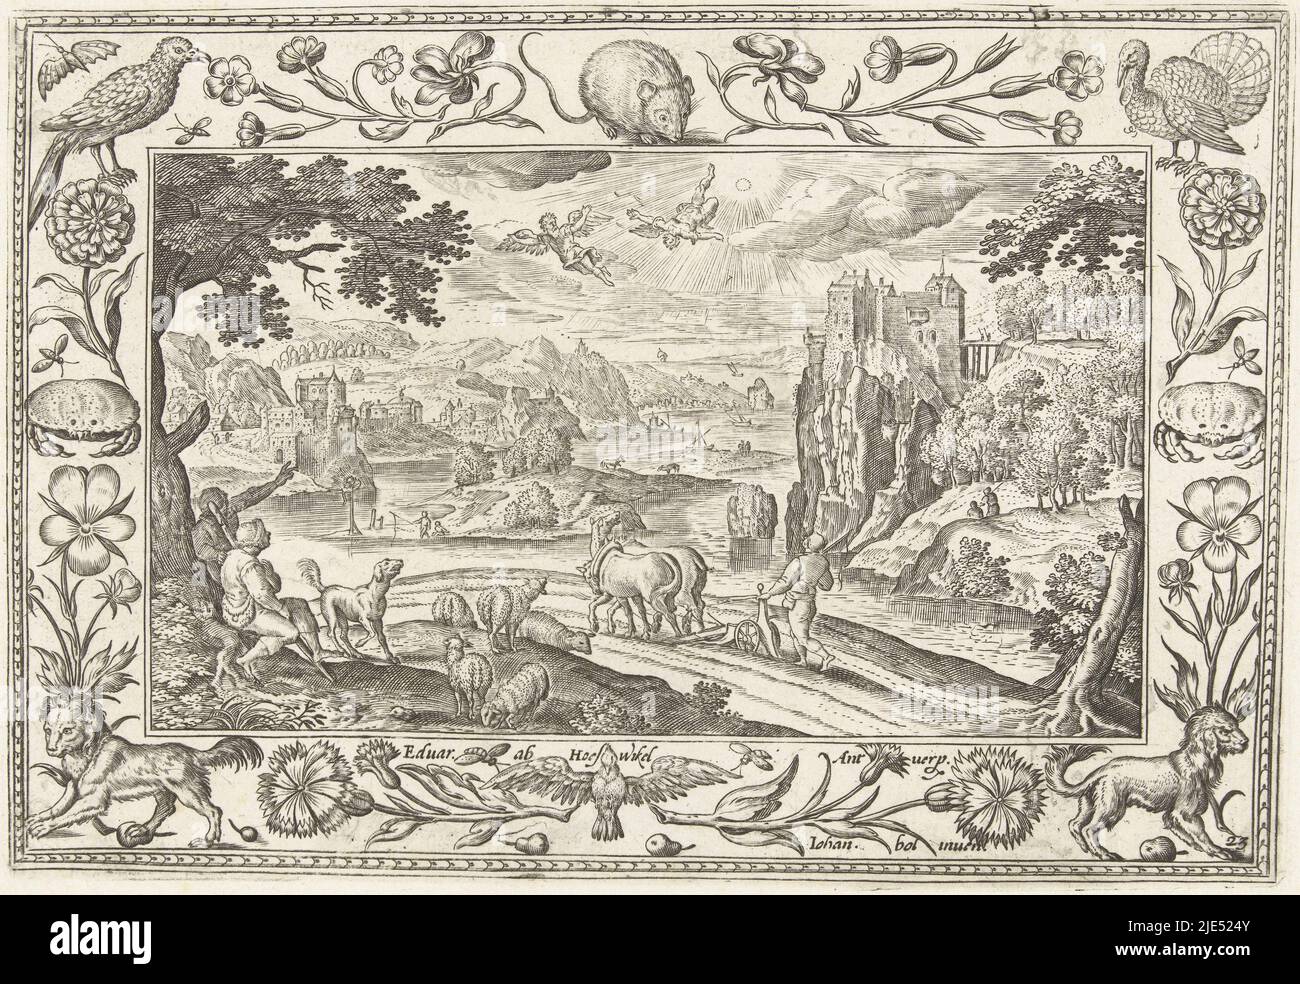 Landscape with field. In the sky Daedalus and Icarus. Icarus flies too high in the sun, the wax of his wings melts and he falls from the sky. In the foreground a farmer looks up from ploughing, while two shepherds look up at the sky and point. The print has an ornamental frame with flowers and animals. He is part of a series of landscapes with biblical, mythological scenes and hunting scenes, Fall of Icarus Landscapes with biblical, mythological scenes and hunting scenes (title series)., print maker: Adriaen Collaert, (mentioned on object), Hans Bol, (mentioned on object), publisher: Eduwart Stock Photo